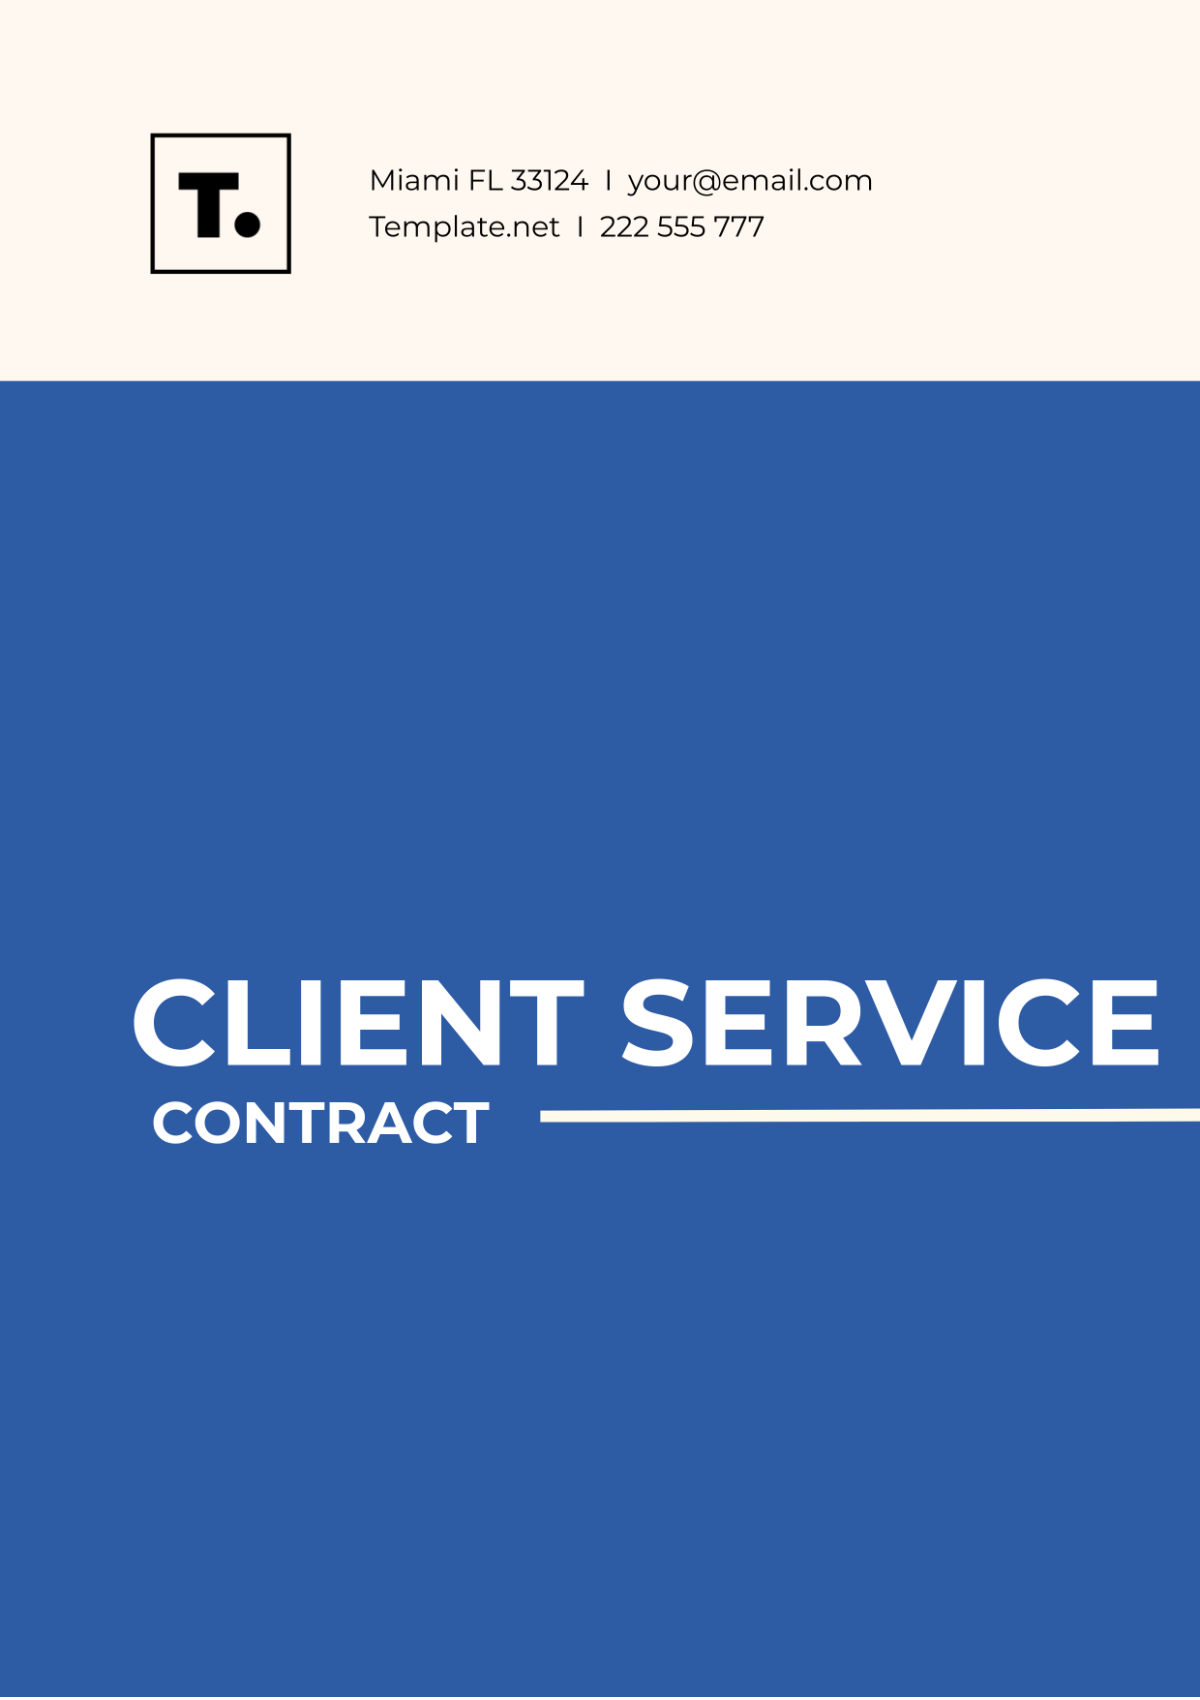 Free Client Service Contract Template